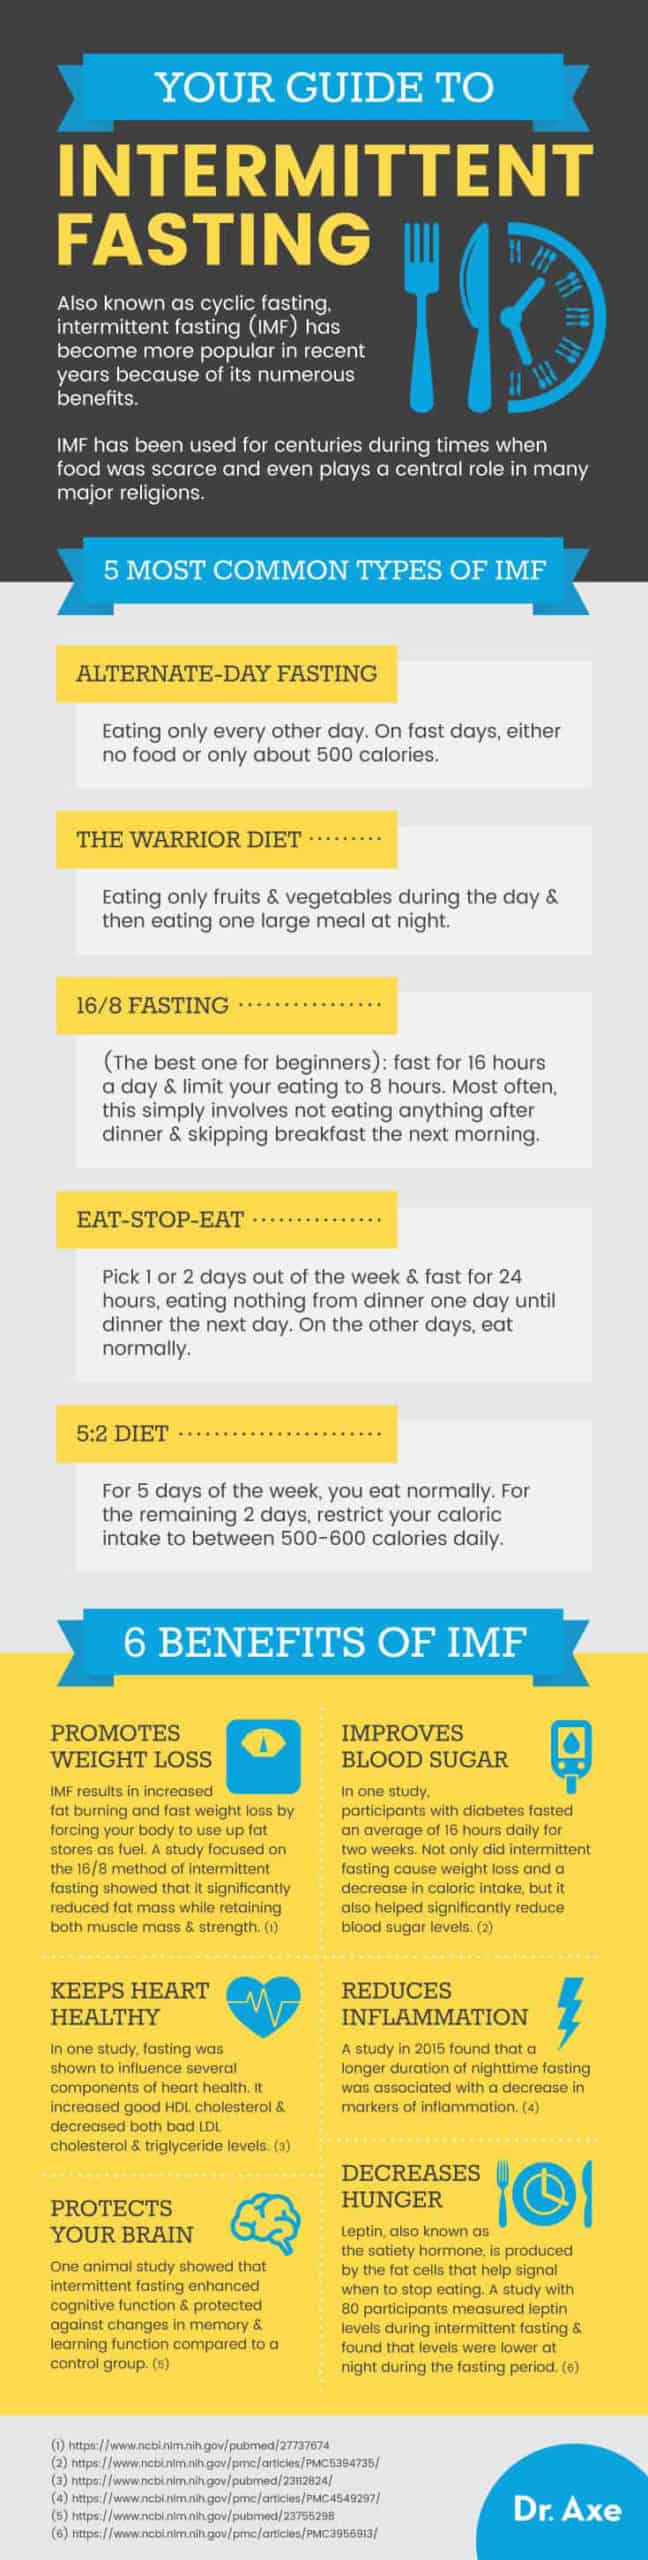 Intermittent fasting - Dr. Axe